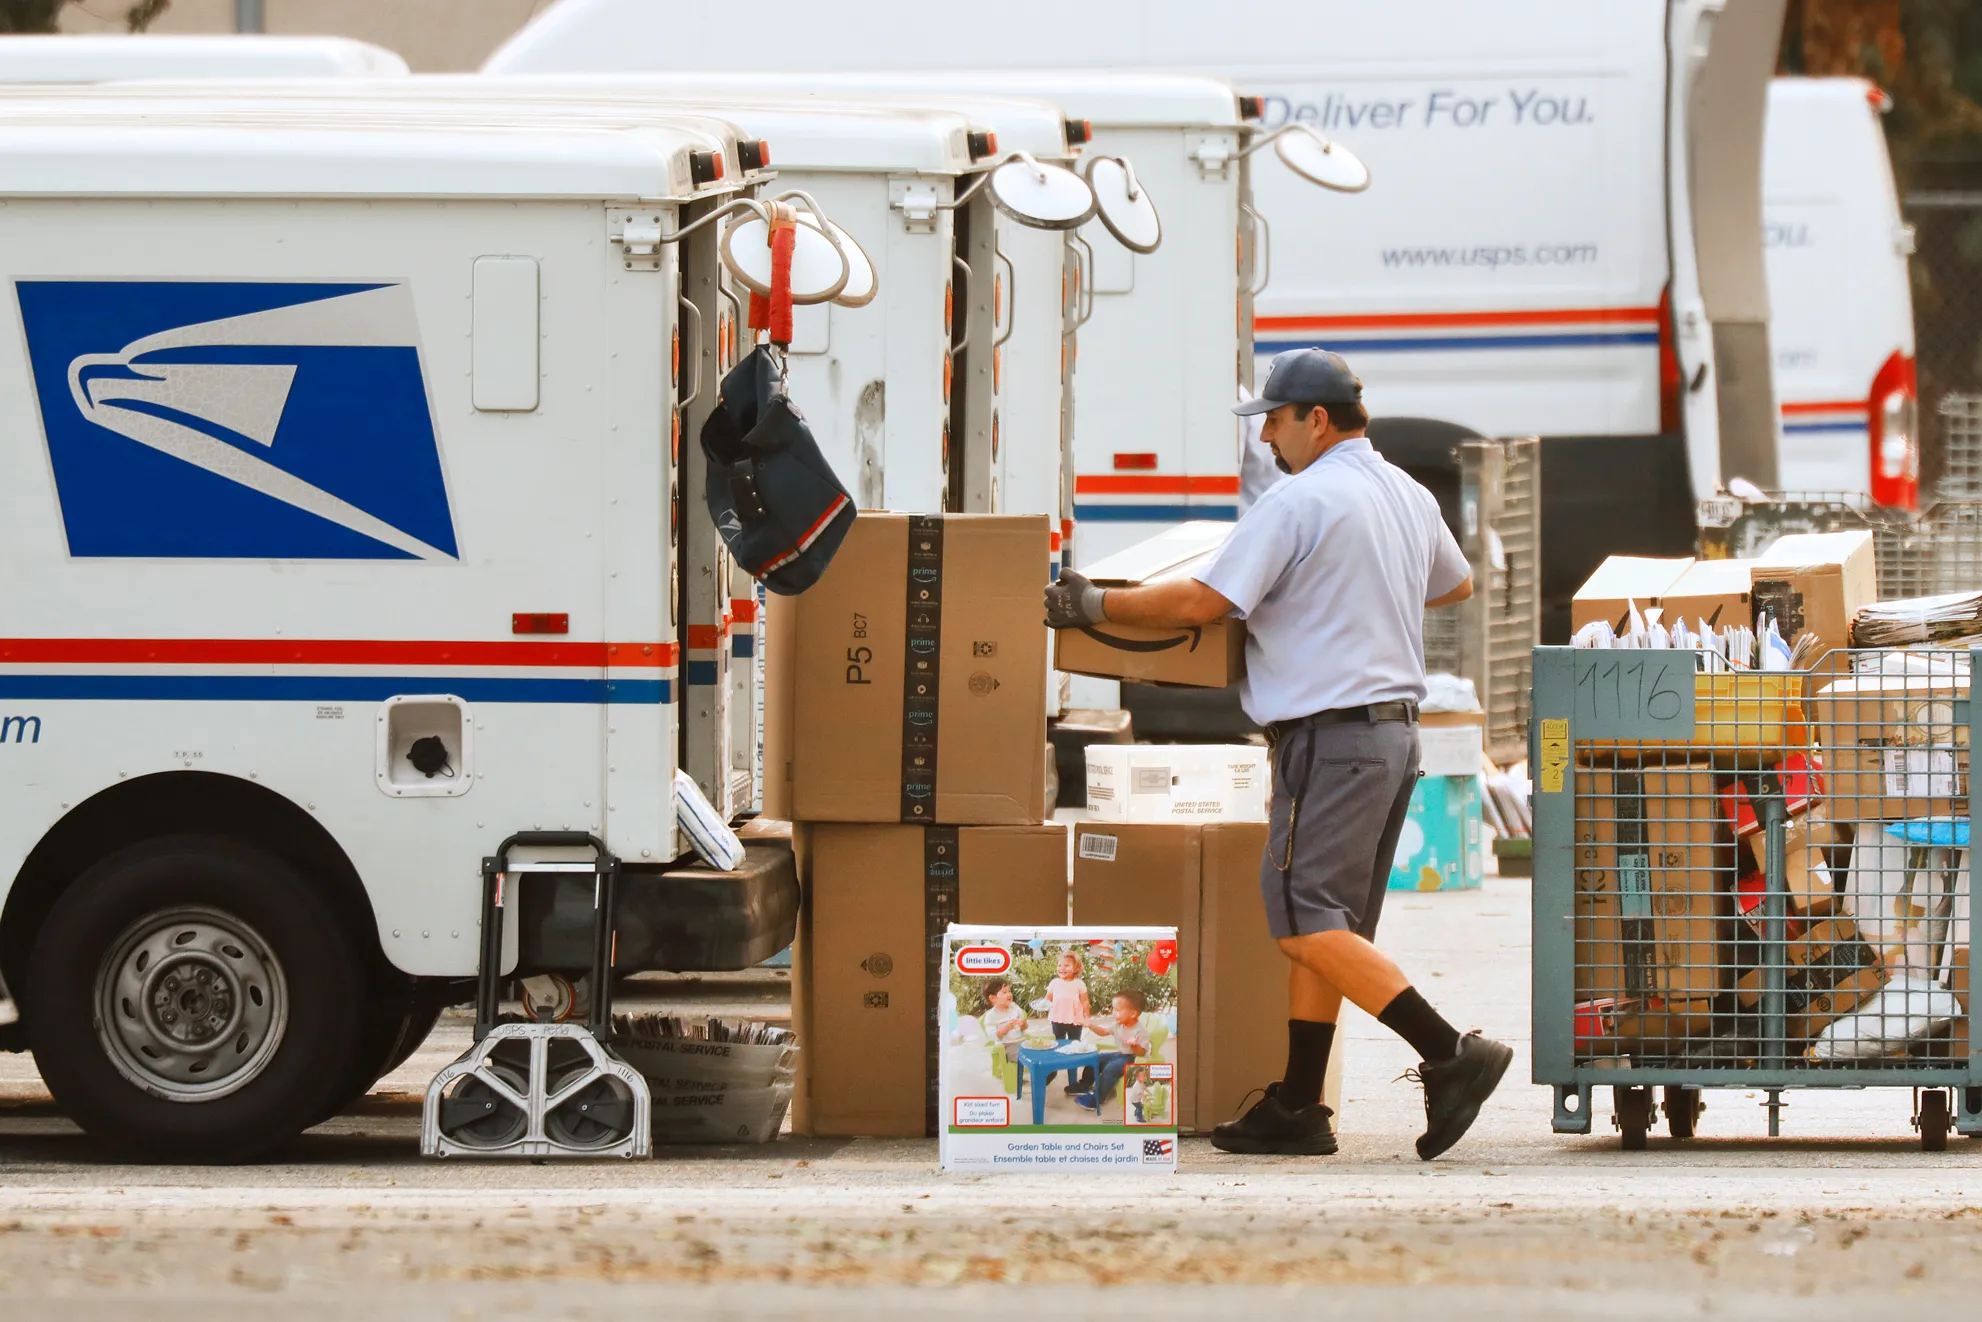 Mail Delivery Is About to Get Slower and More Expensive